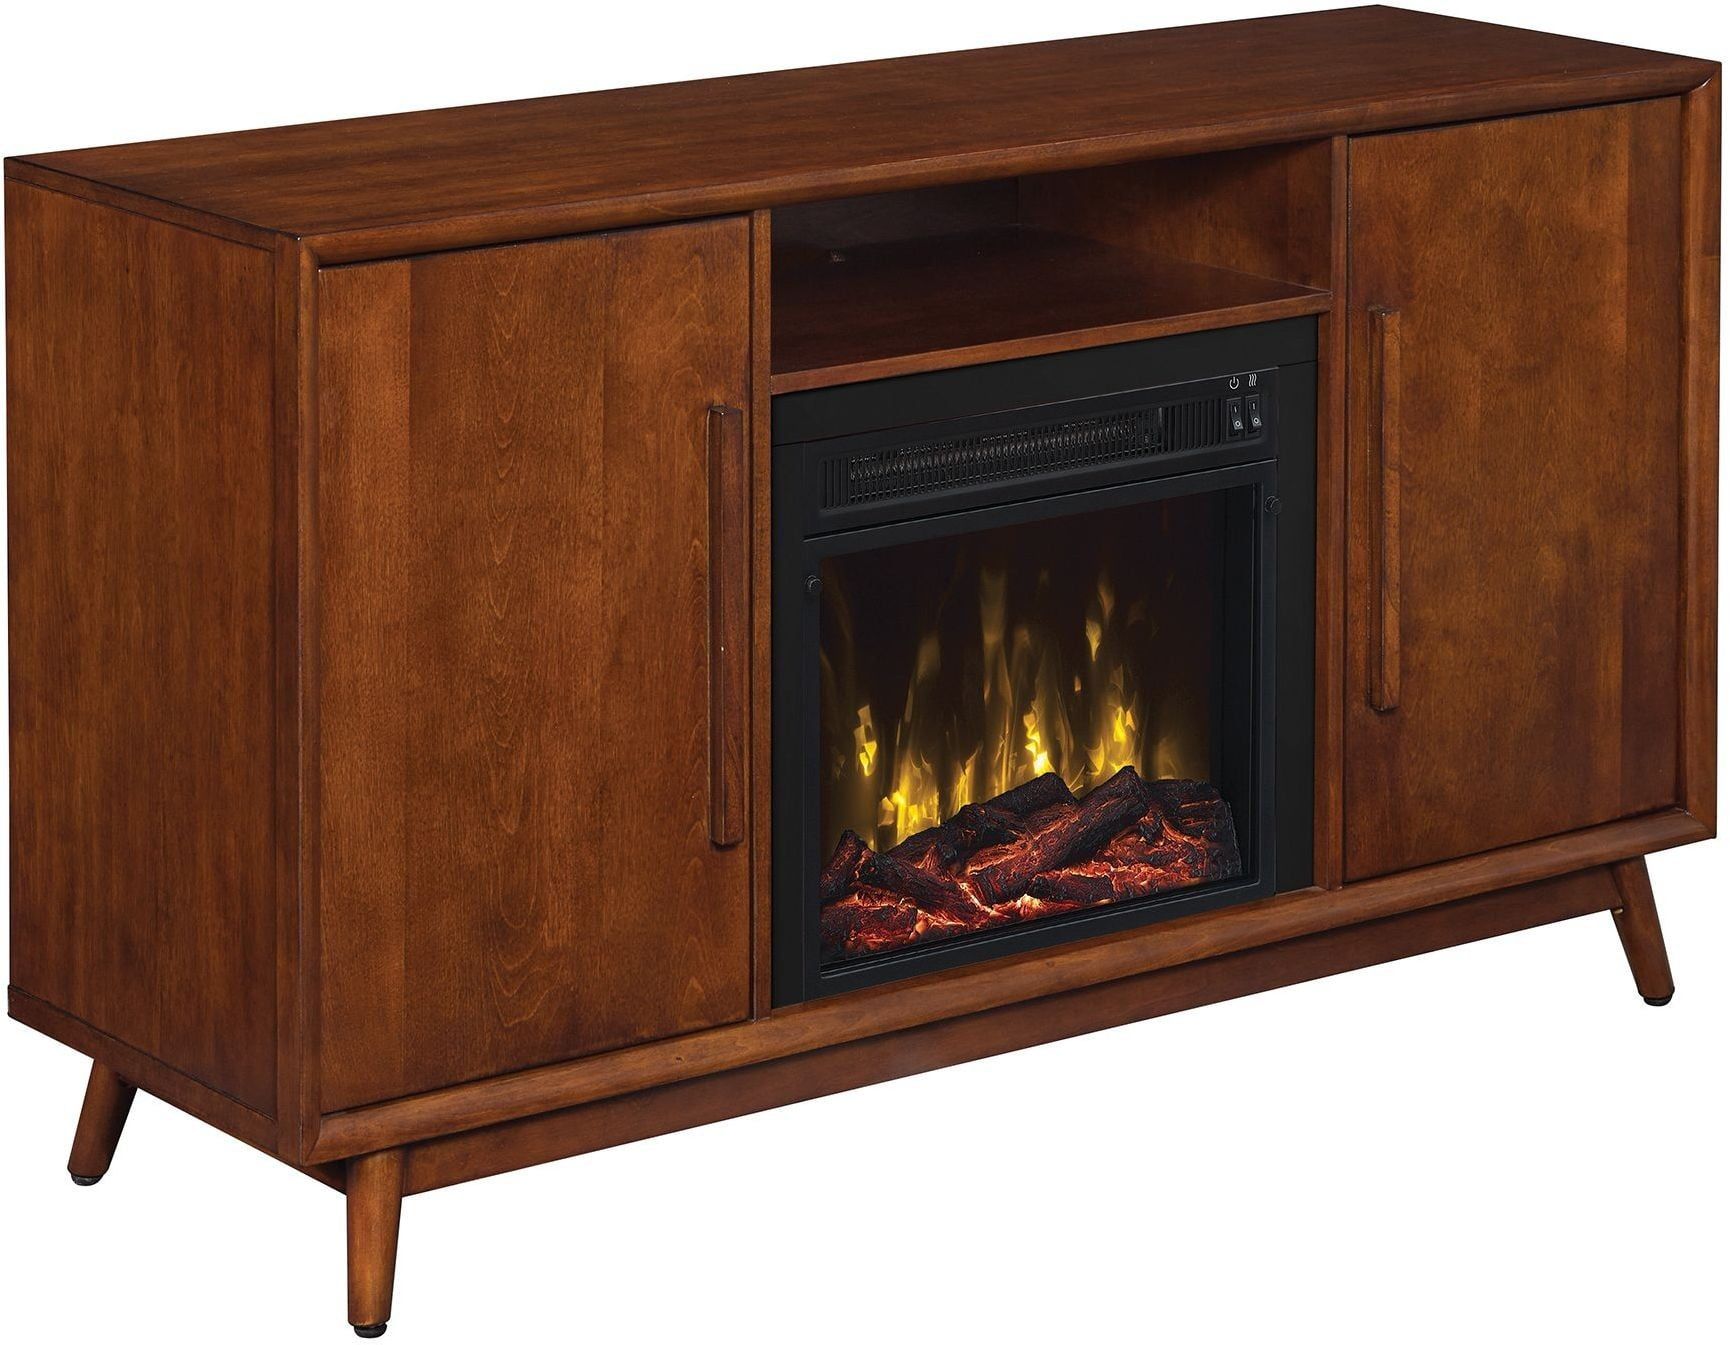 Classicflame Mahogany Cherry Leawood Tv Stand With Electric Fireplace In Tv Stands With Electric Fireplace (Gallery 8 of 20)